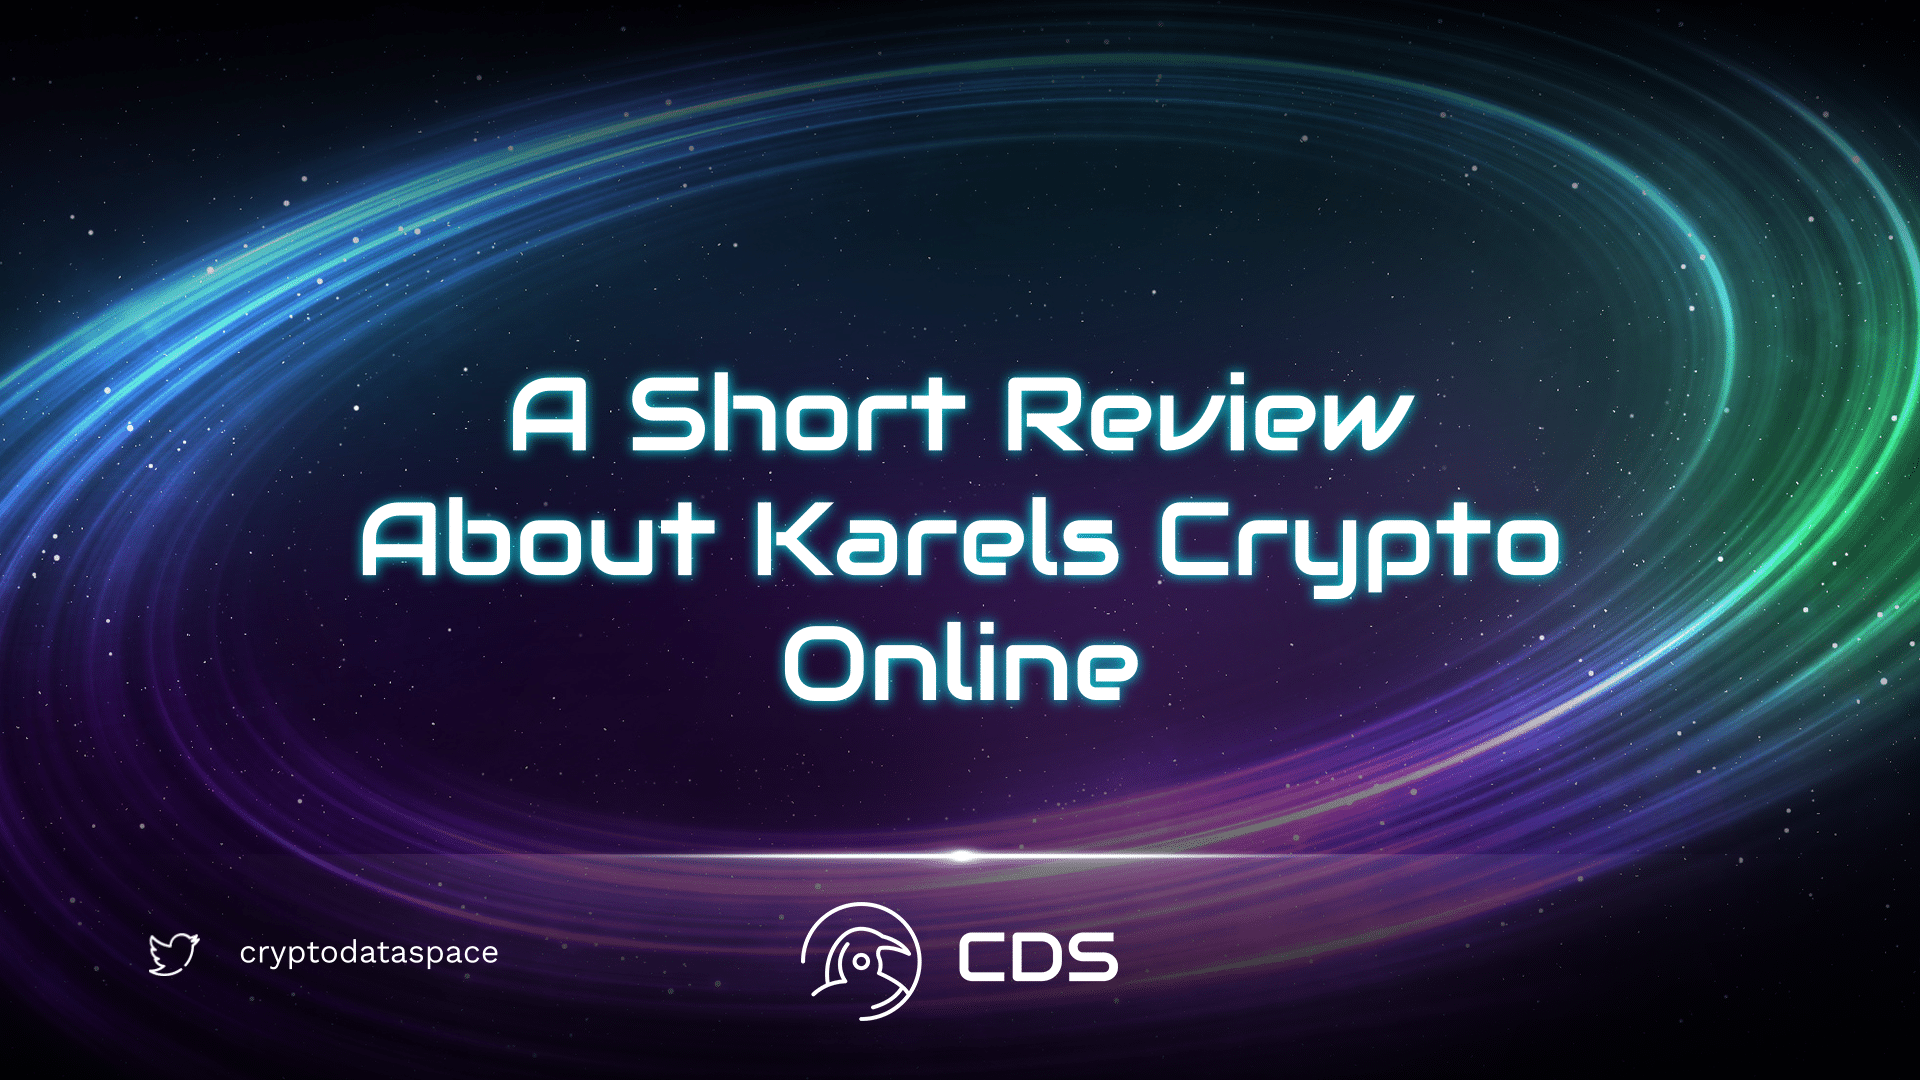 A Short Review About Karels Crypto Online